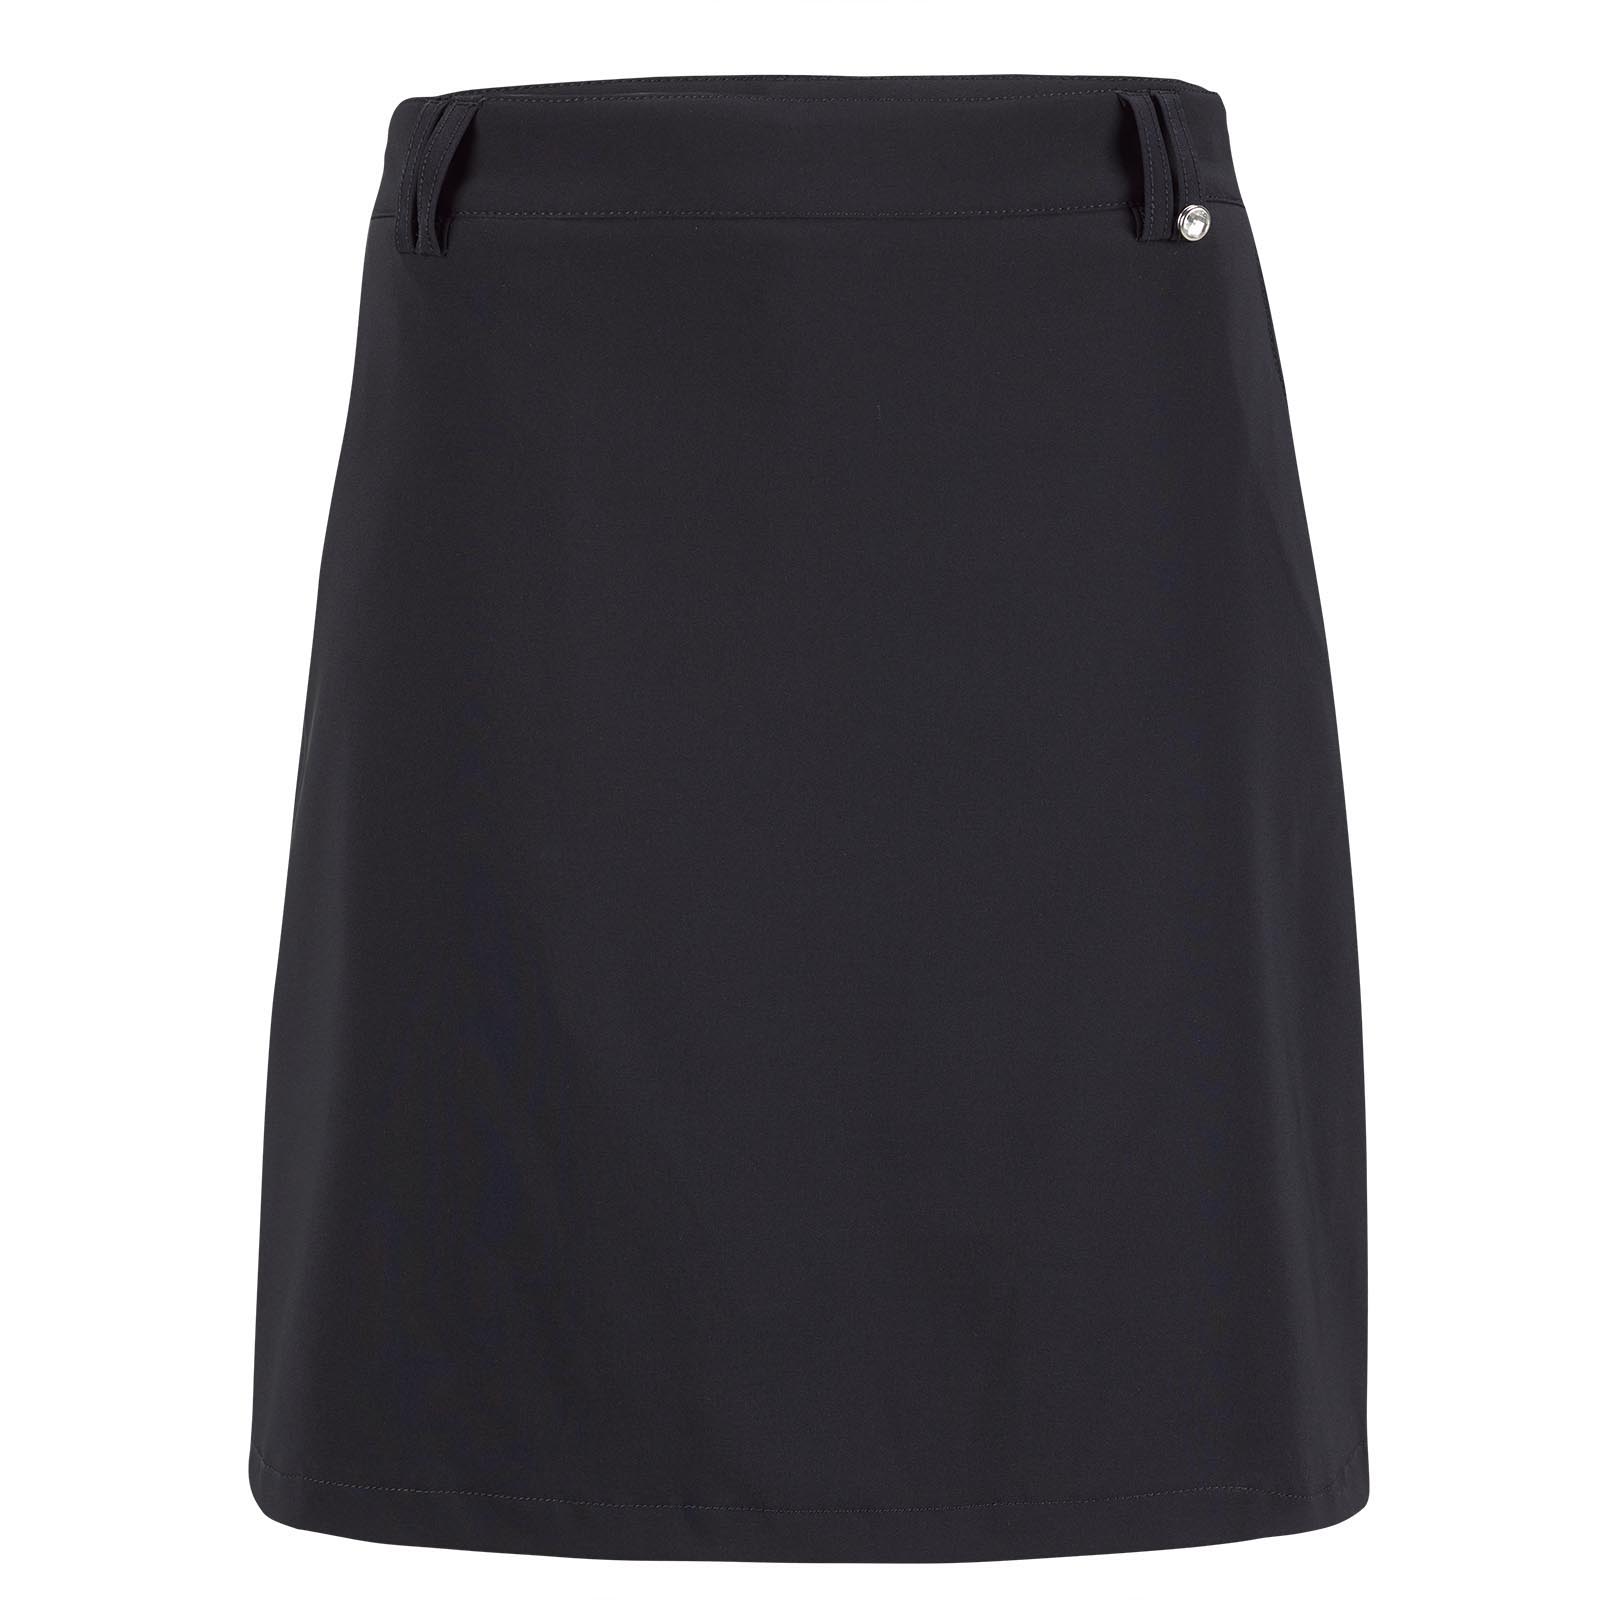 Ladies' golf skort made from water-repellent stretch material